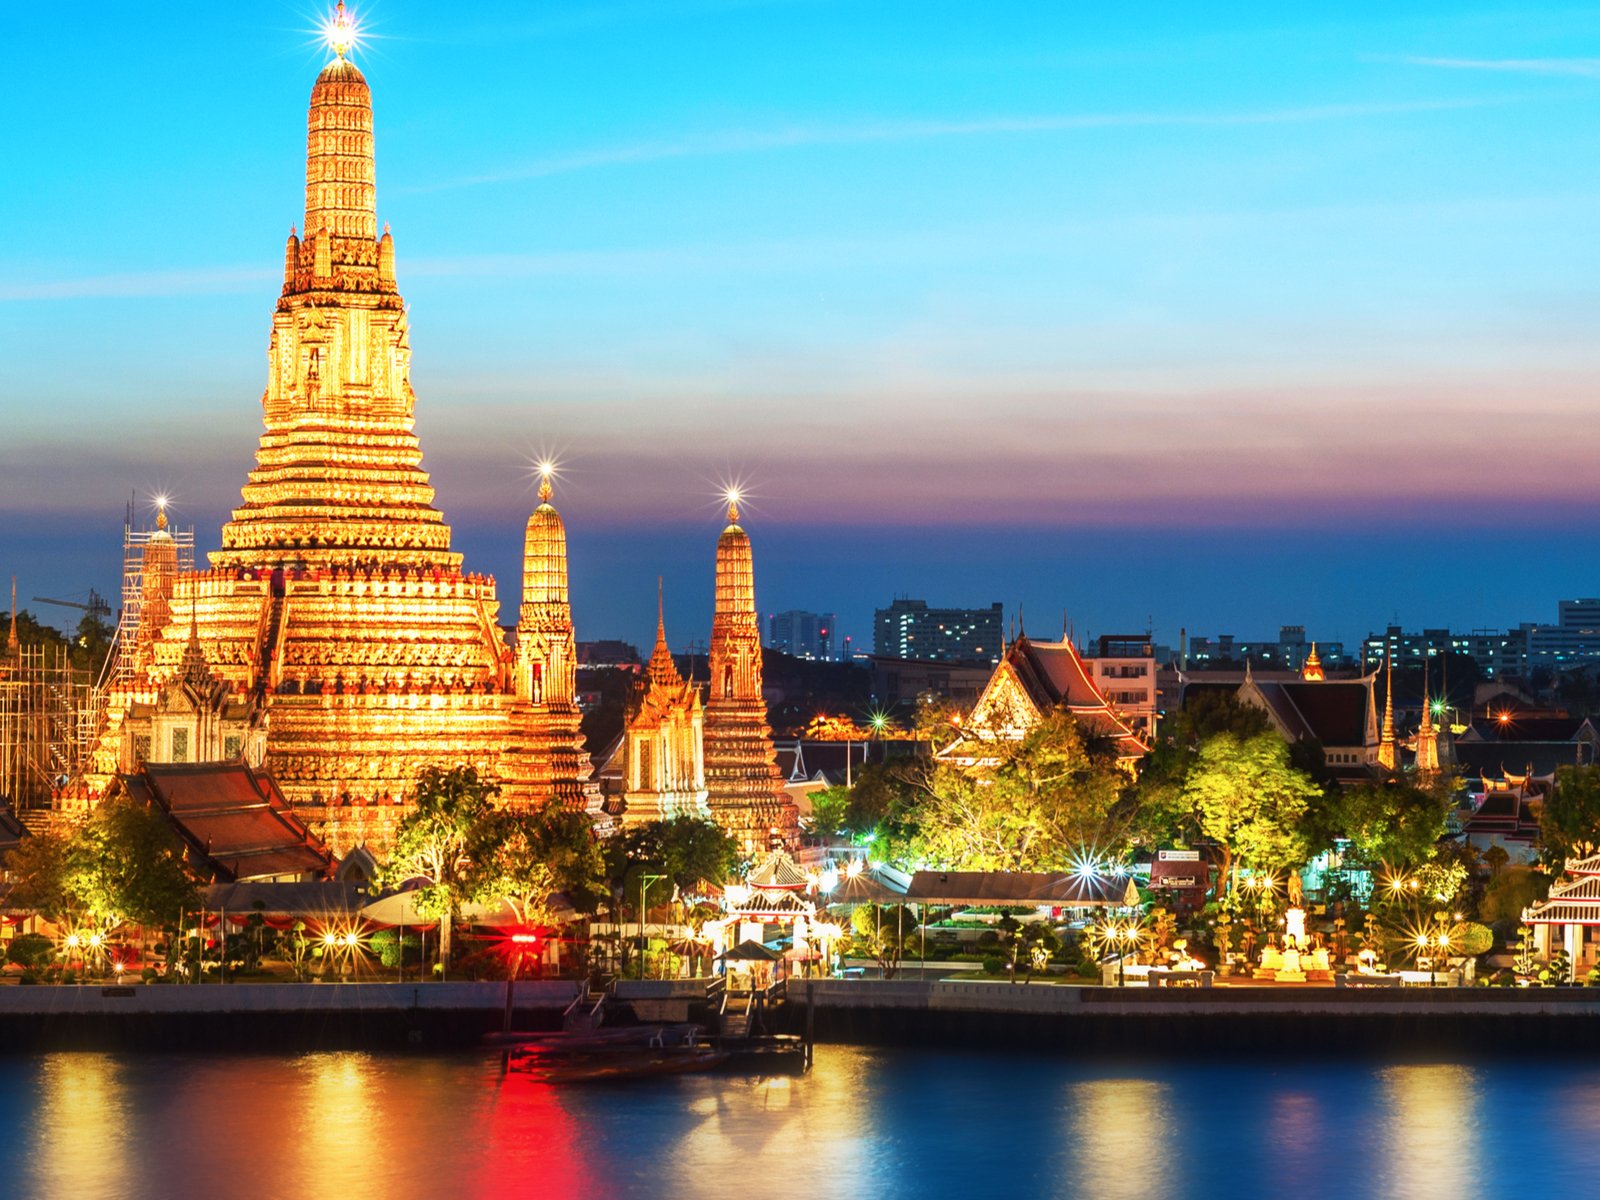 A view of the Wat Arun temple in the Thai capital Bangkok.